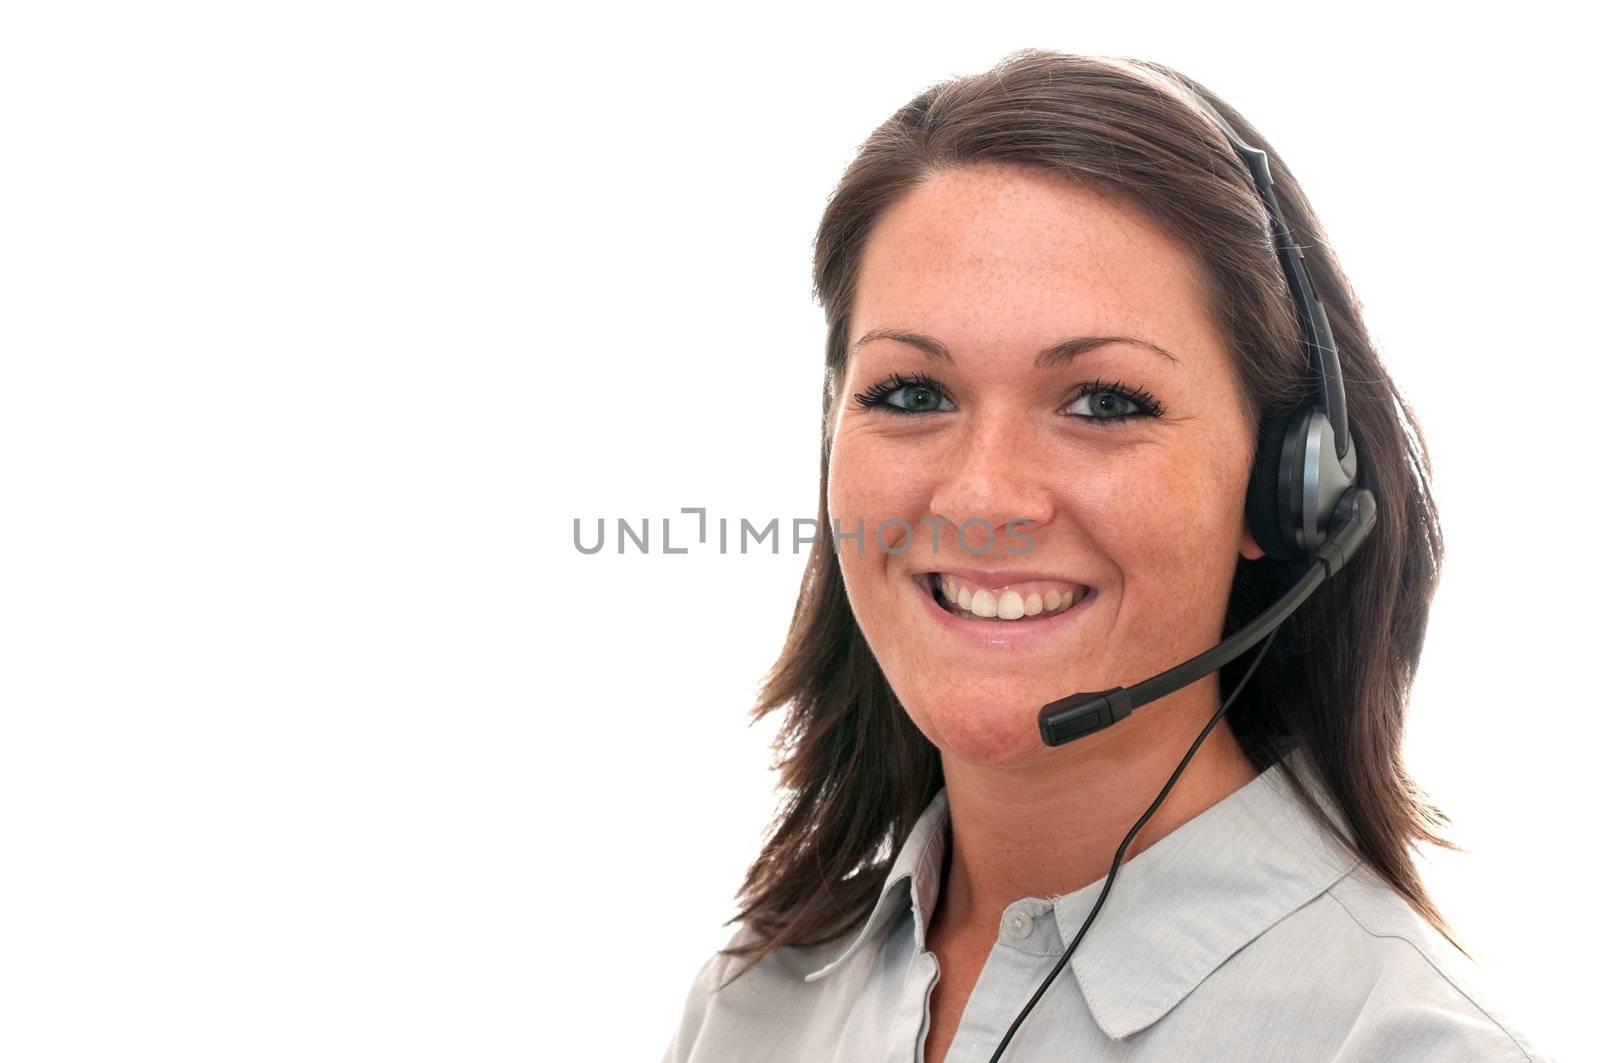 Customer service representative with headset isolated on white background with copy space.